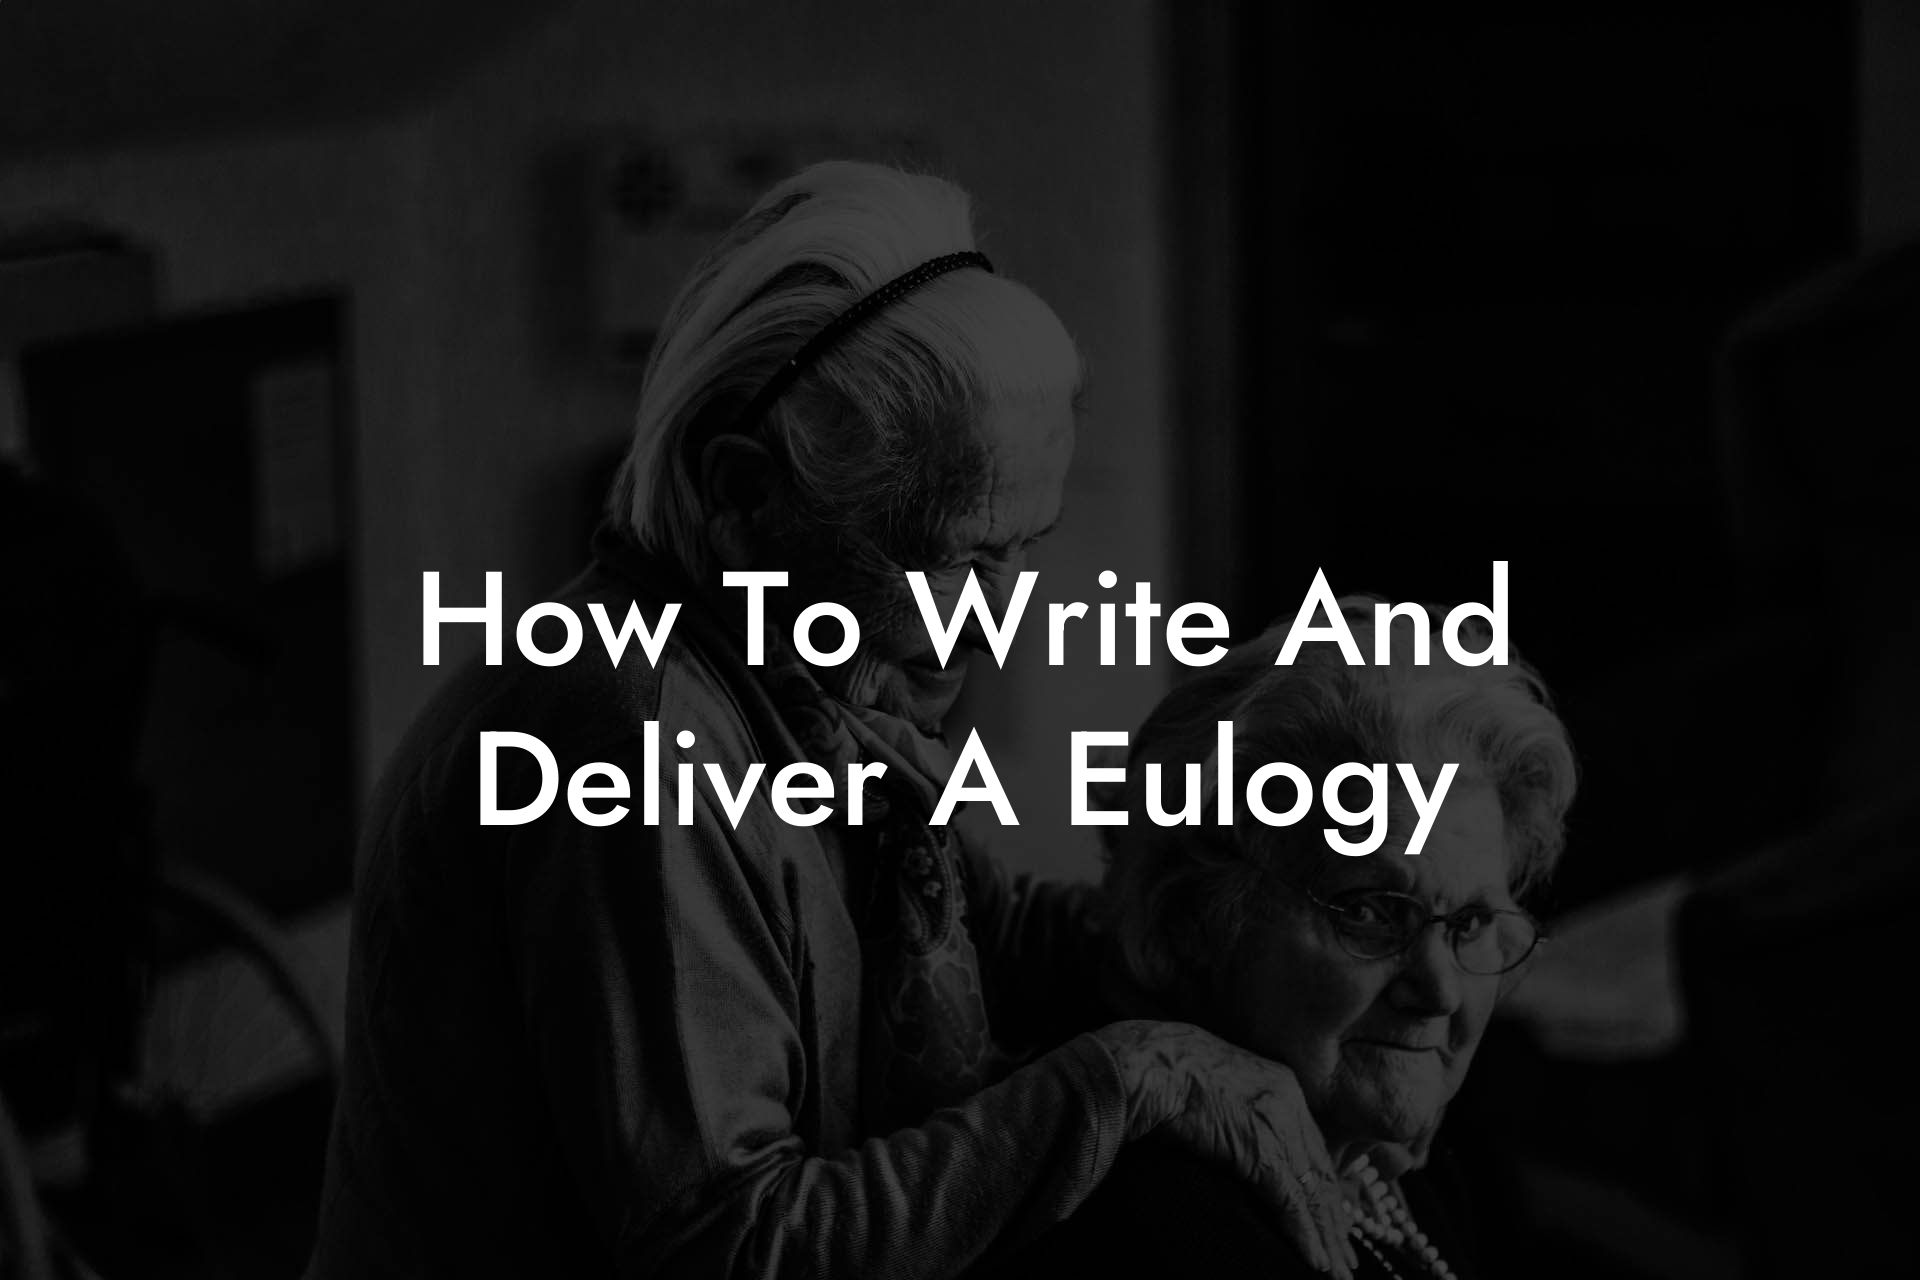 How To Write And Deliver A Eulogy